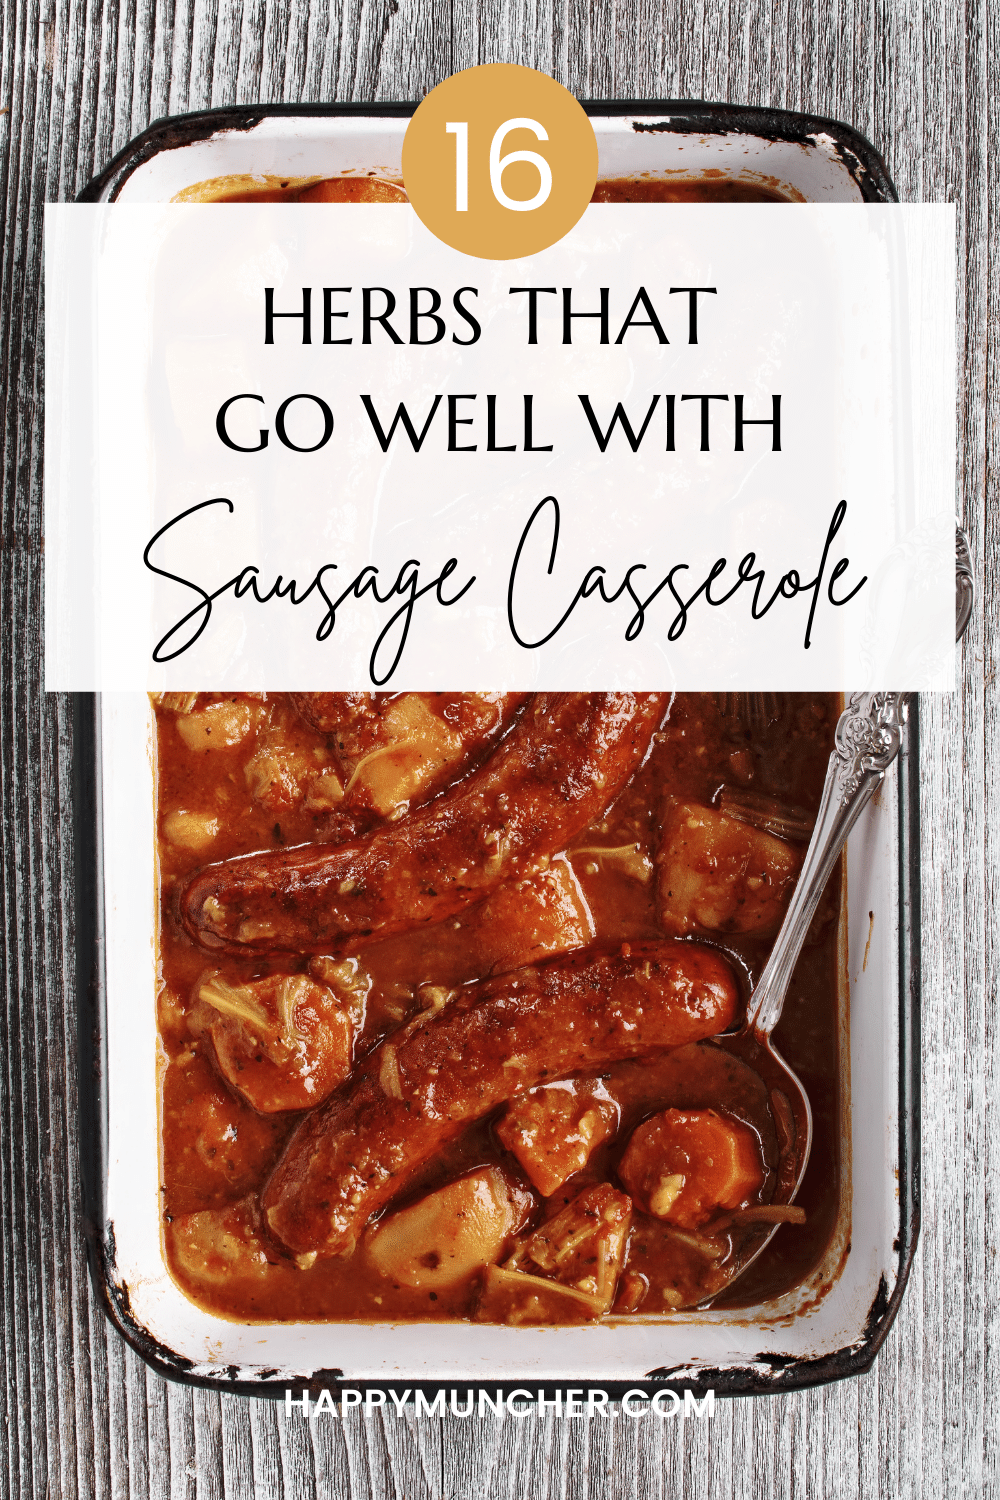 16 Herbs That Go Well With Sausage Casserole Happy Muncher 